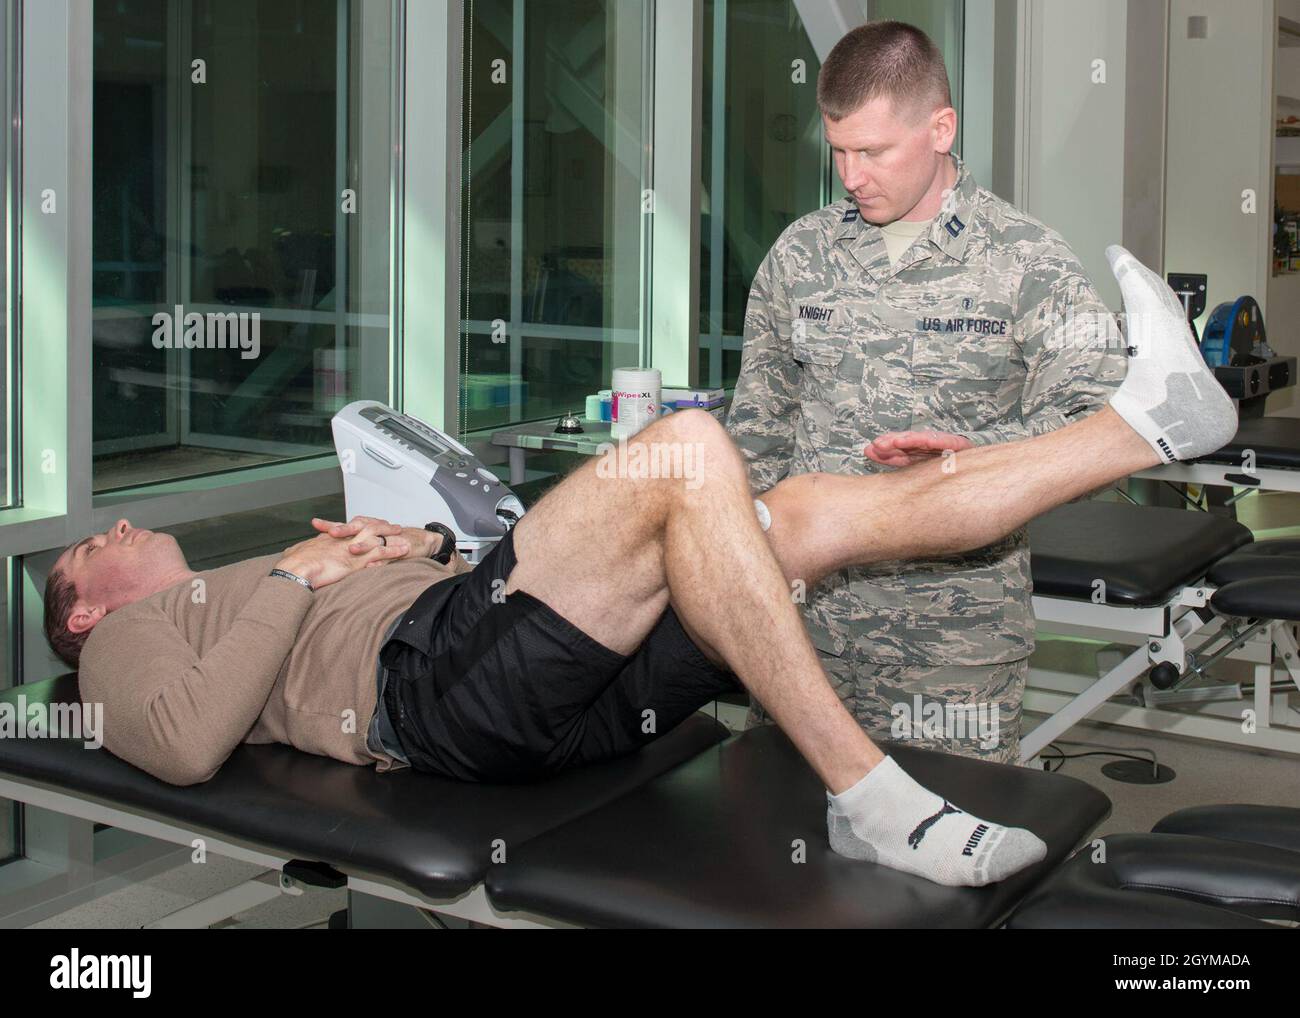 https://c8.alamy.com/comp/2GYMADA/capt-ryan-knight-4th-operational-medical-readiness-squadron-physical-therapist-preforms-neuromuscular-electrical-stimulation-nmes-on-maj-dusten-weathers-334th-flight-squadron-assistant-director-of-operations-jan-29-2019-at-the-thomas-koritz-clinic-on-seymour-johnson-air-force-base-nc-physical-therapist-work-with-patients-to-identify-problems-develop-a-care-plan-and-provide-services-that-help-restore-function-improve-mobility-and-relieve-pain-us-air-force-photo-by-airman-first-class-kimberly-barrera-2GYMADA.jpg